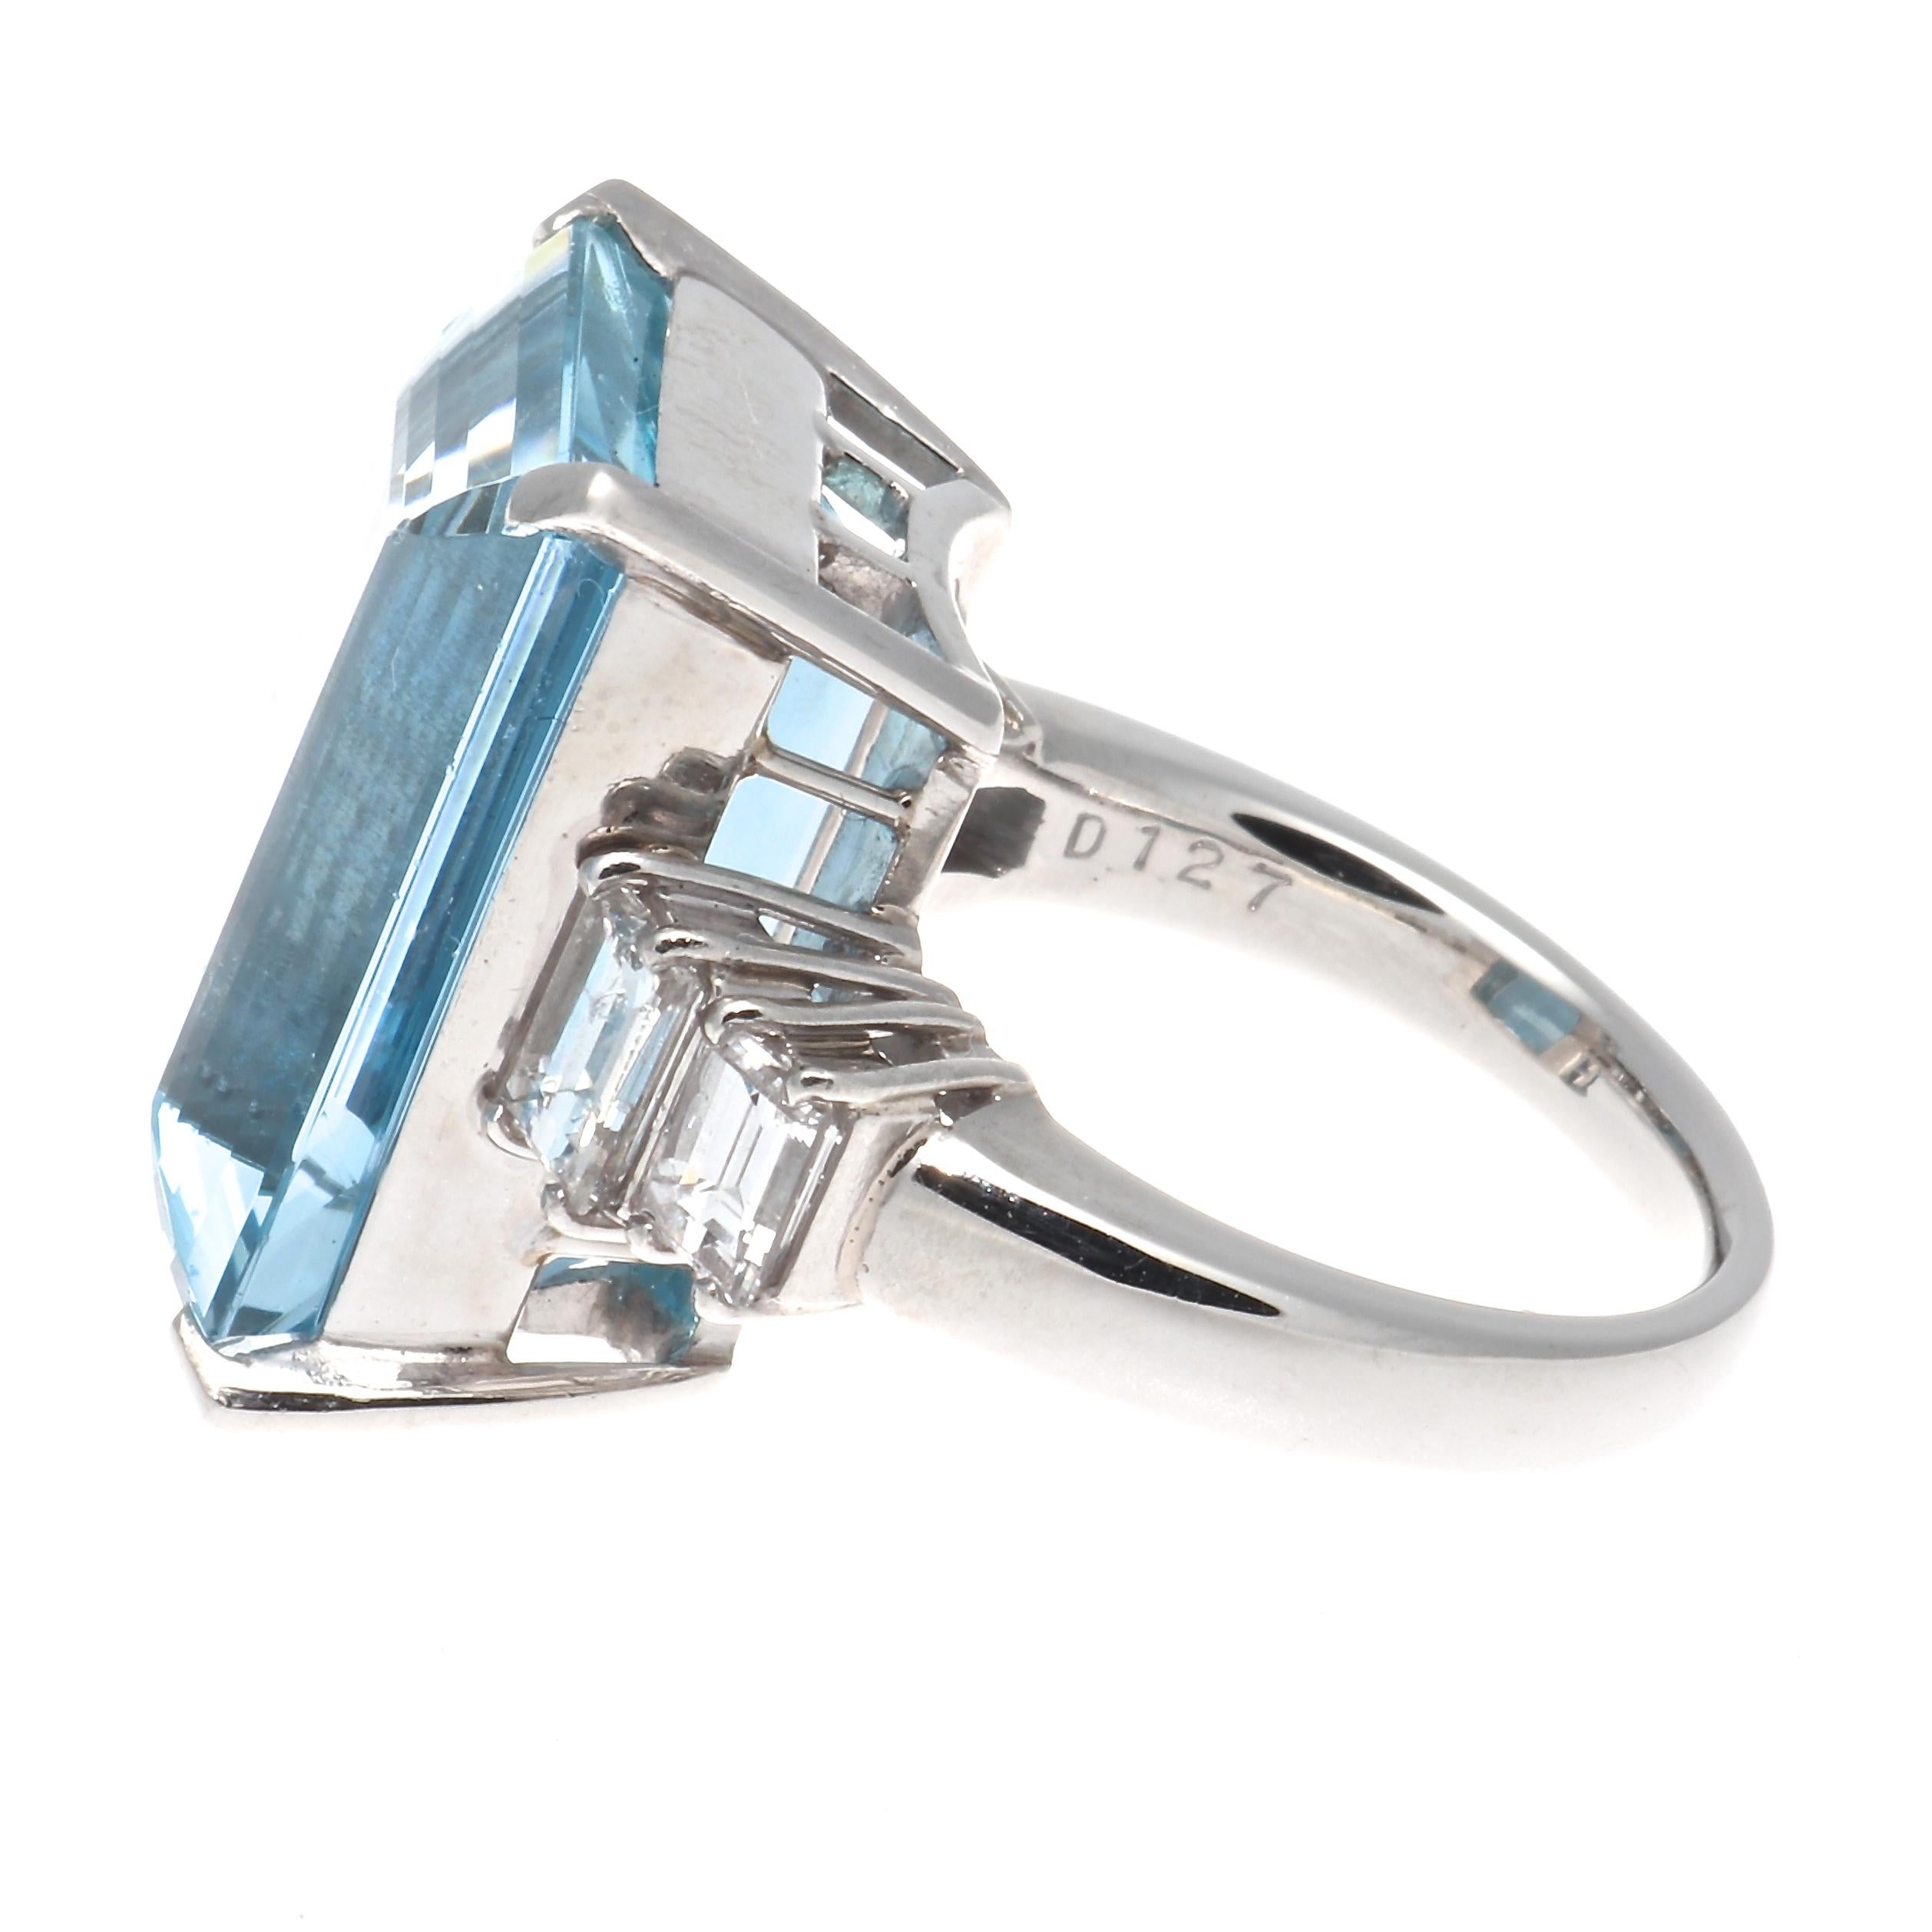 Harnessing the naturally soothing spirit of the beautiful ocean, Aquamarine captures the vibrant healing powers of the ancient, life-giving waters of the Earth. Known in ancient folklore as the treasure of mermaids, the Aquamarine helps to reconnect